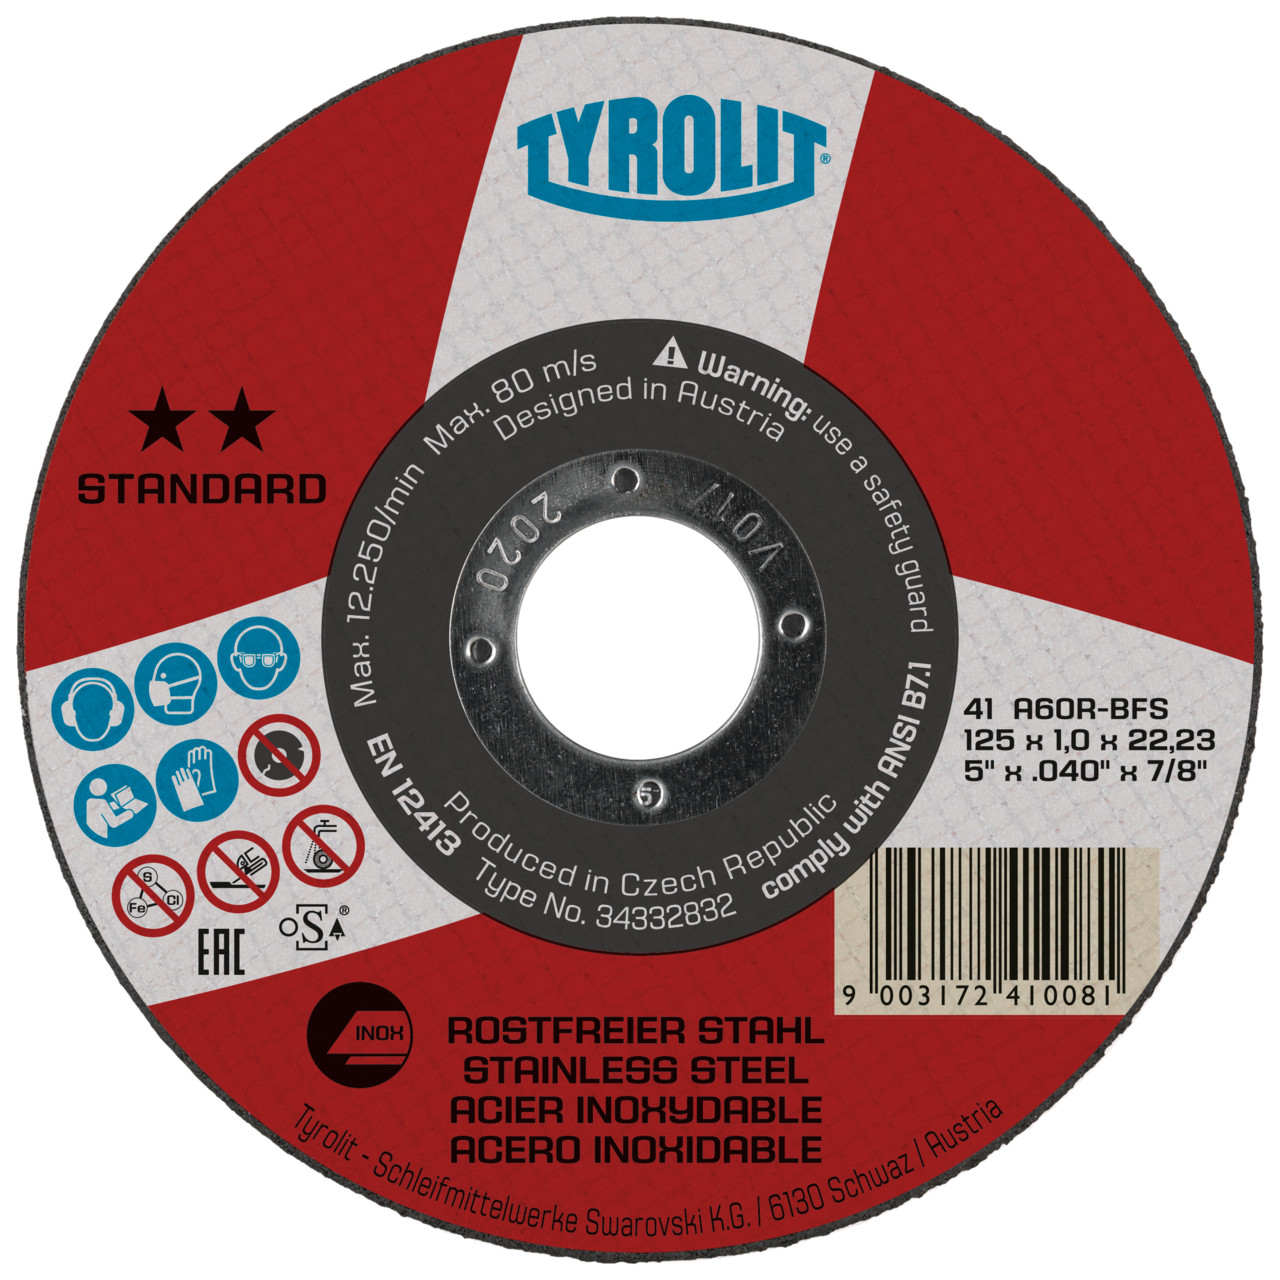 Tyrolit Cutting discs DxDxH 178x2.0x22.23 For stainless steel, shape: 41 - straight version, Art. 367777